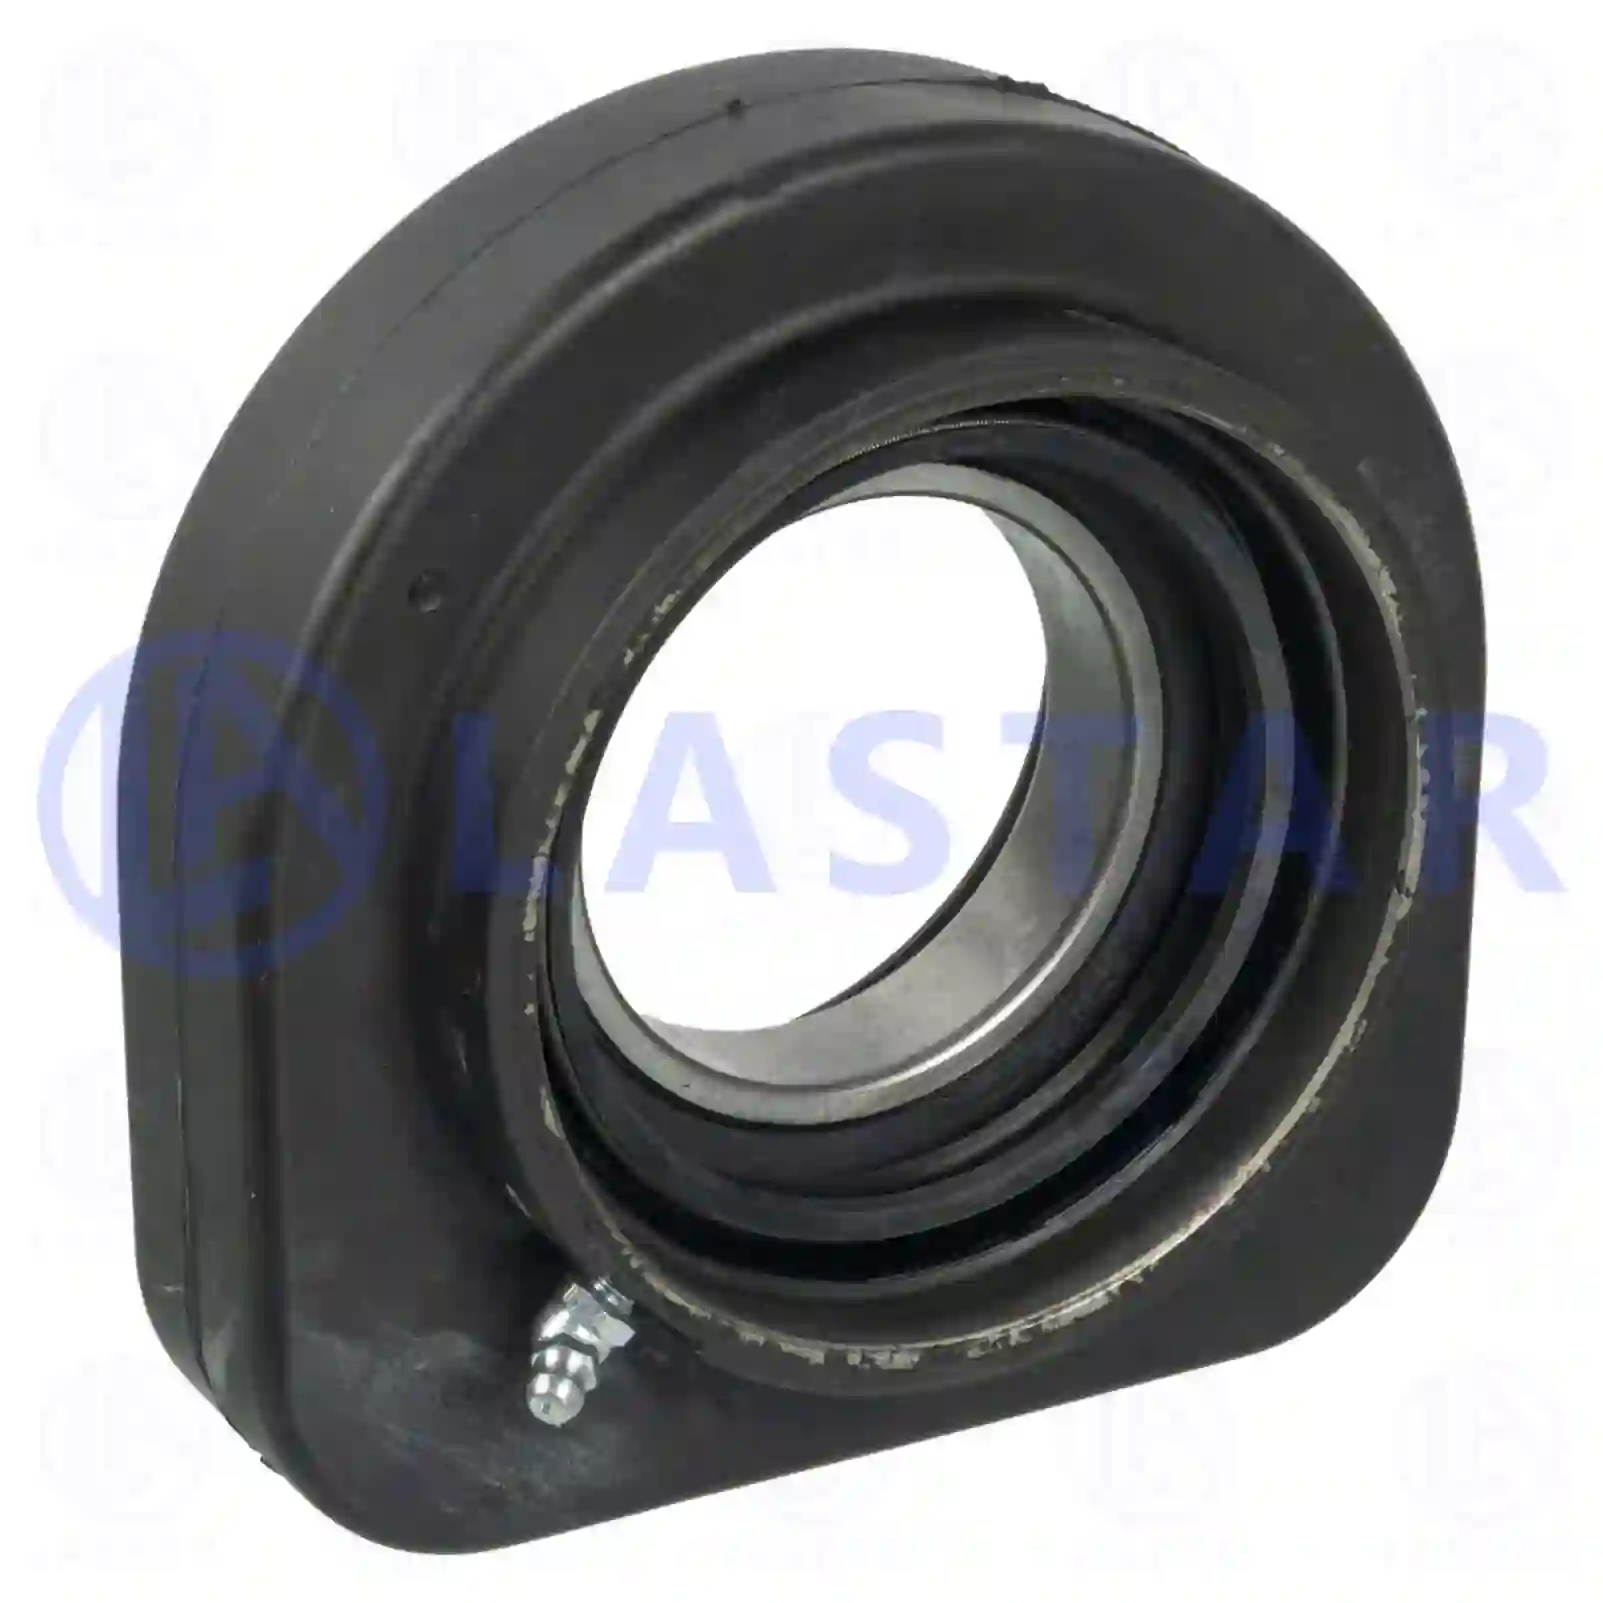 Support Bearing Center bearing, la no: 77734213 ,  oem no:263567, 8171366 Lastar Spare Part | Truck Spare Parts, Auotomotive Spare Parts